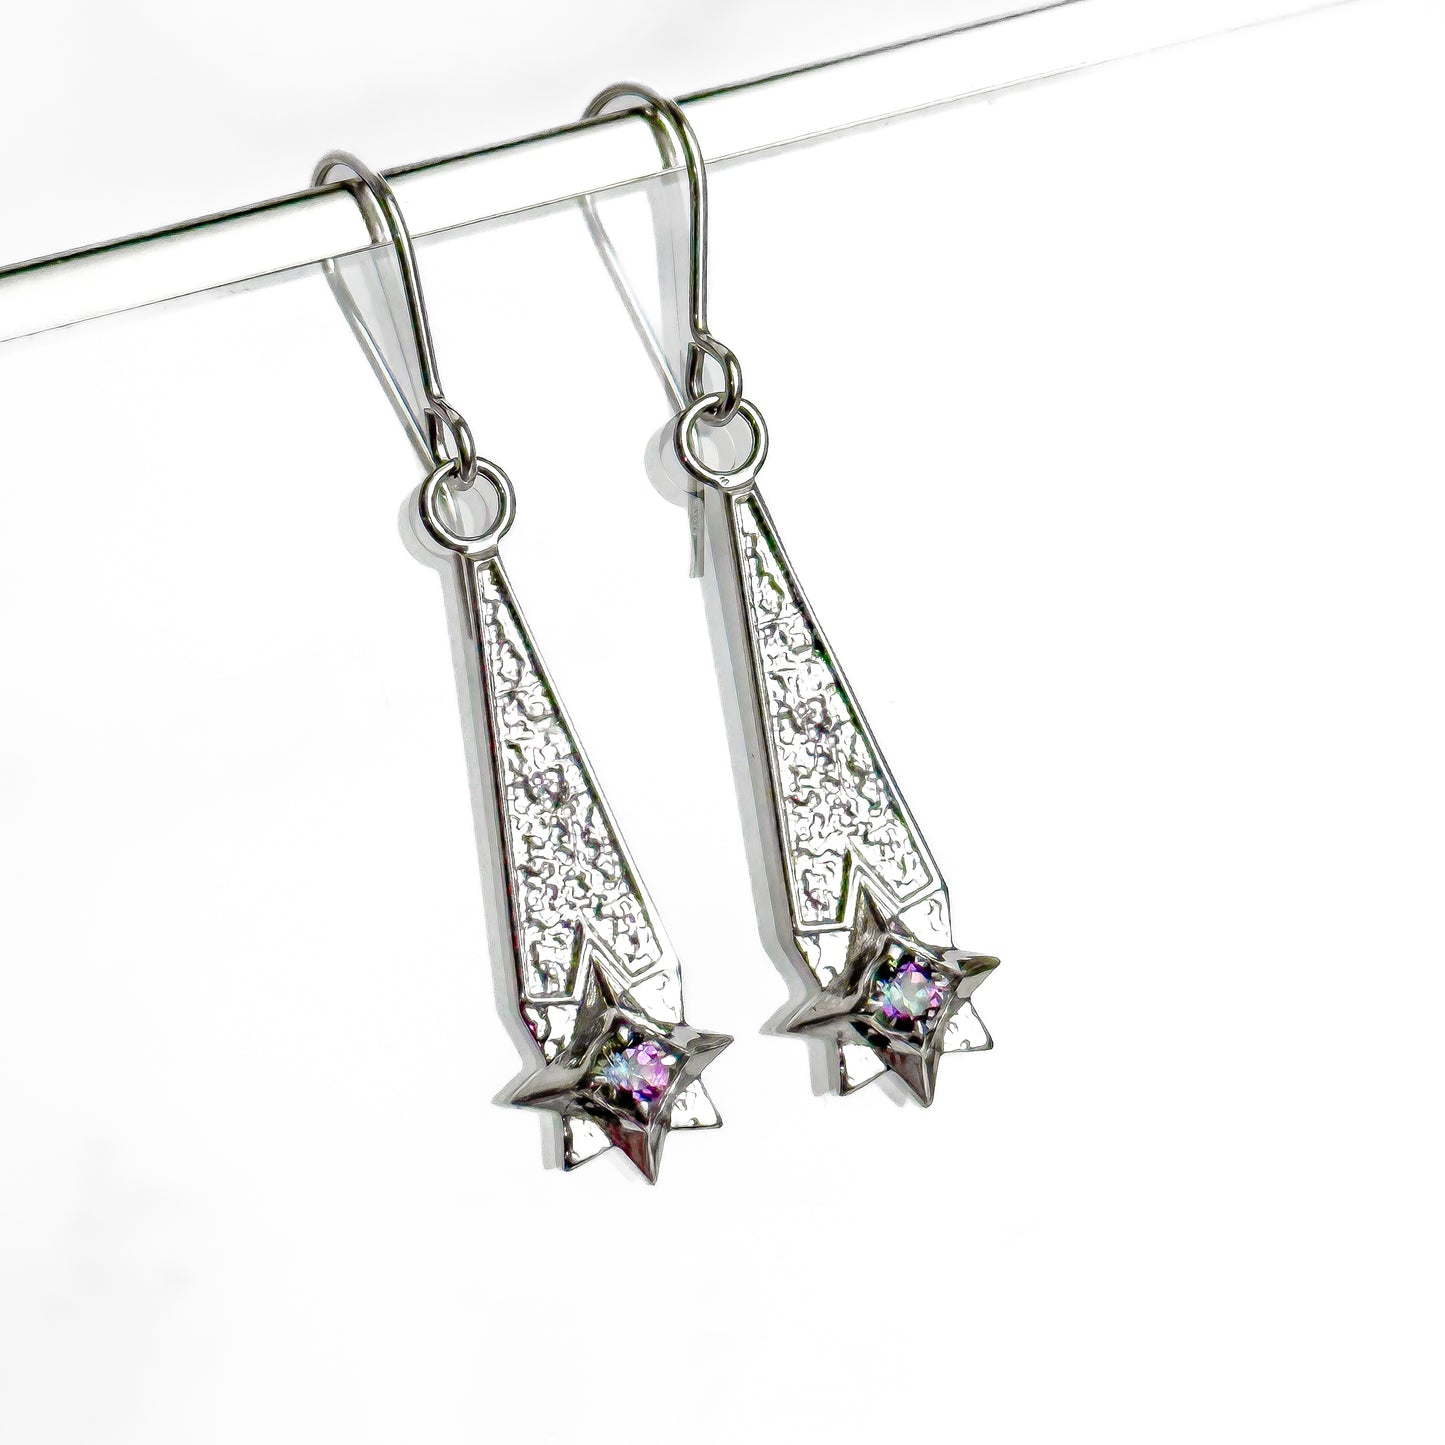 Shooting Sterling Silver Earrings with Mystic Topaz